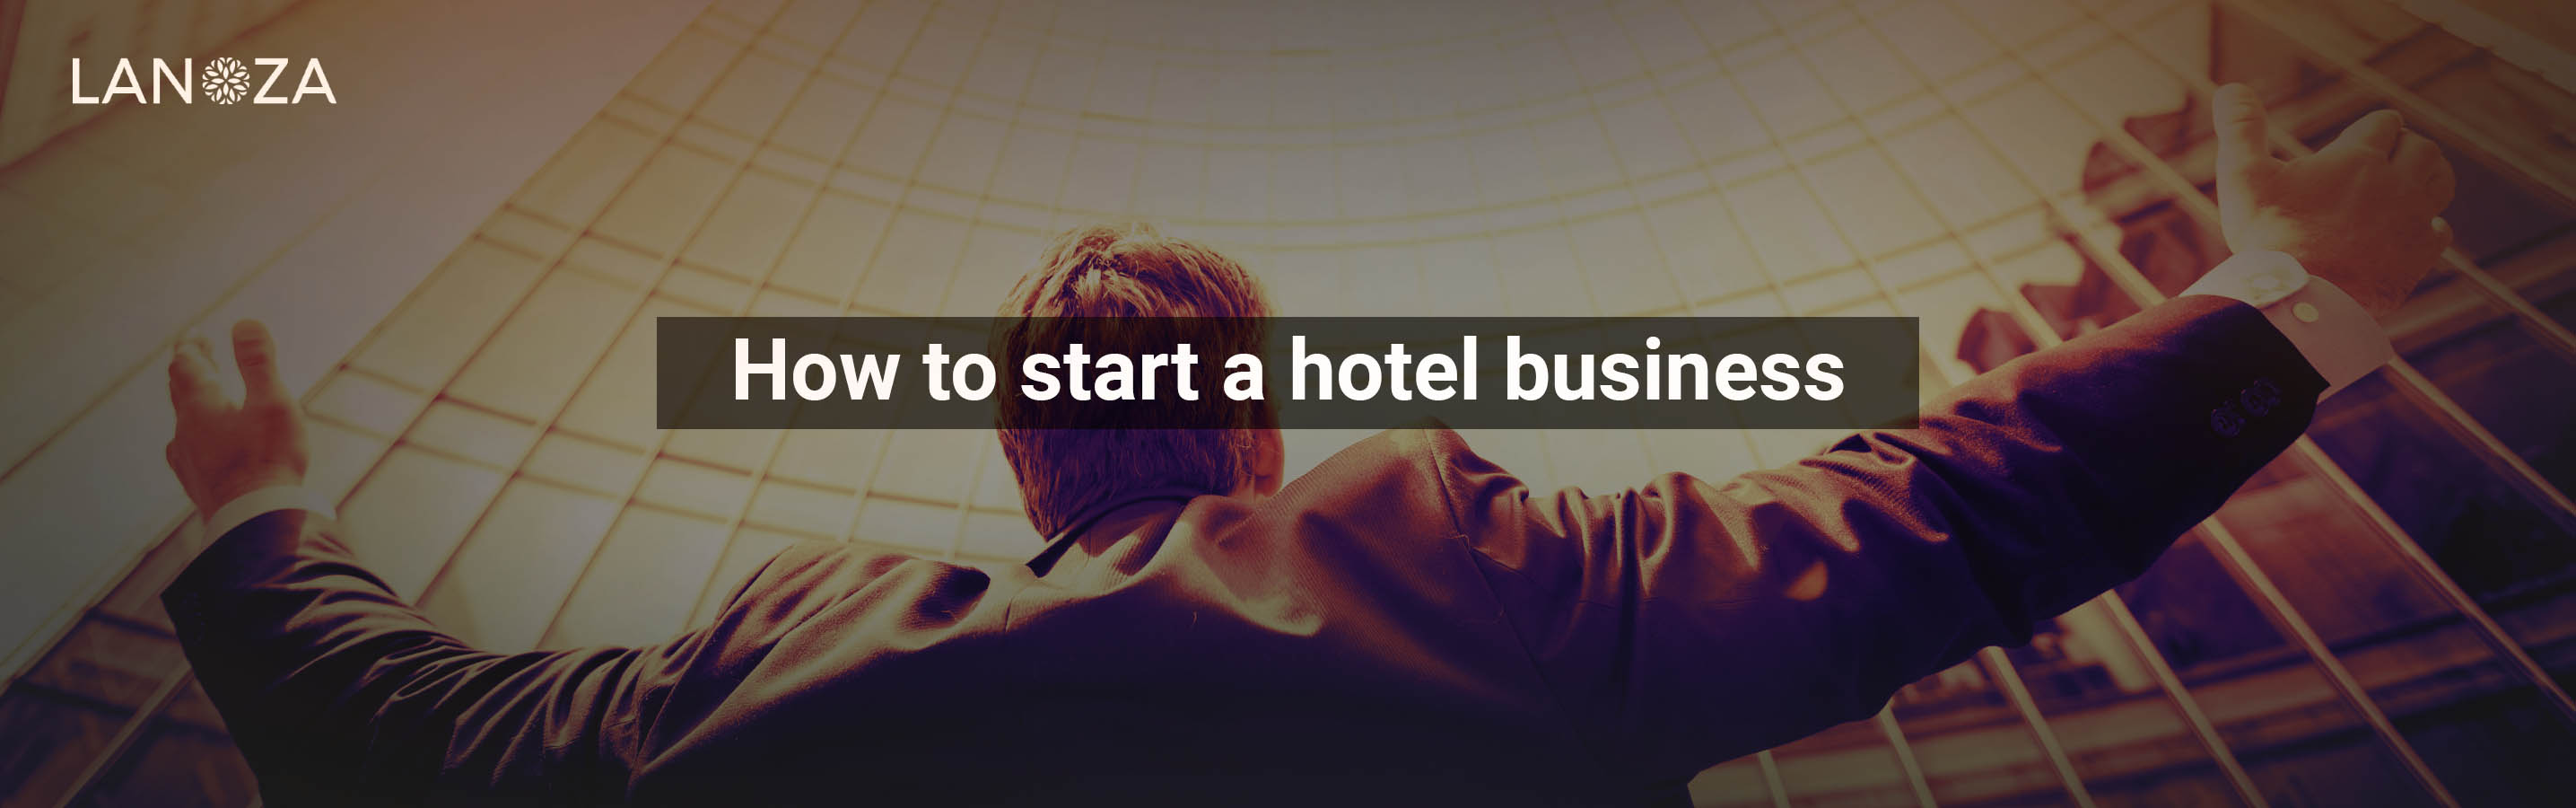 how-to-start-a-hotel-business